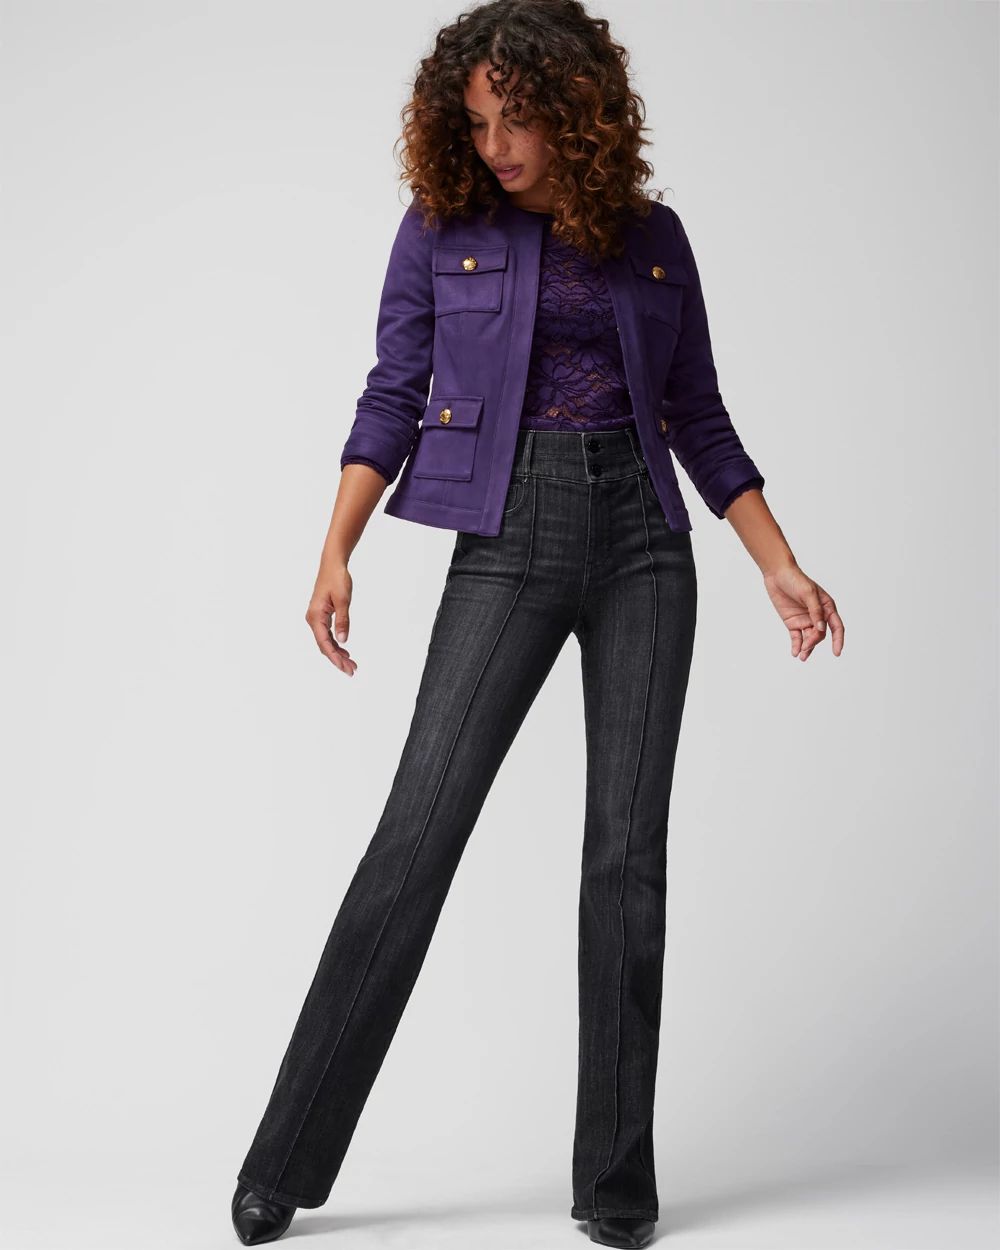 WHBM® Ultra Suede Stylist Jacket click to view larger image.